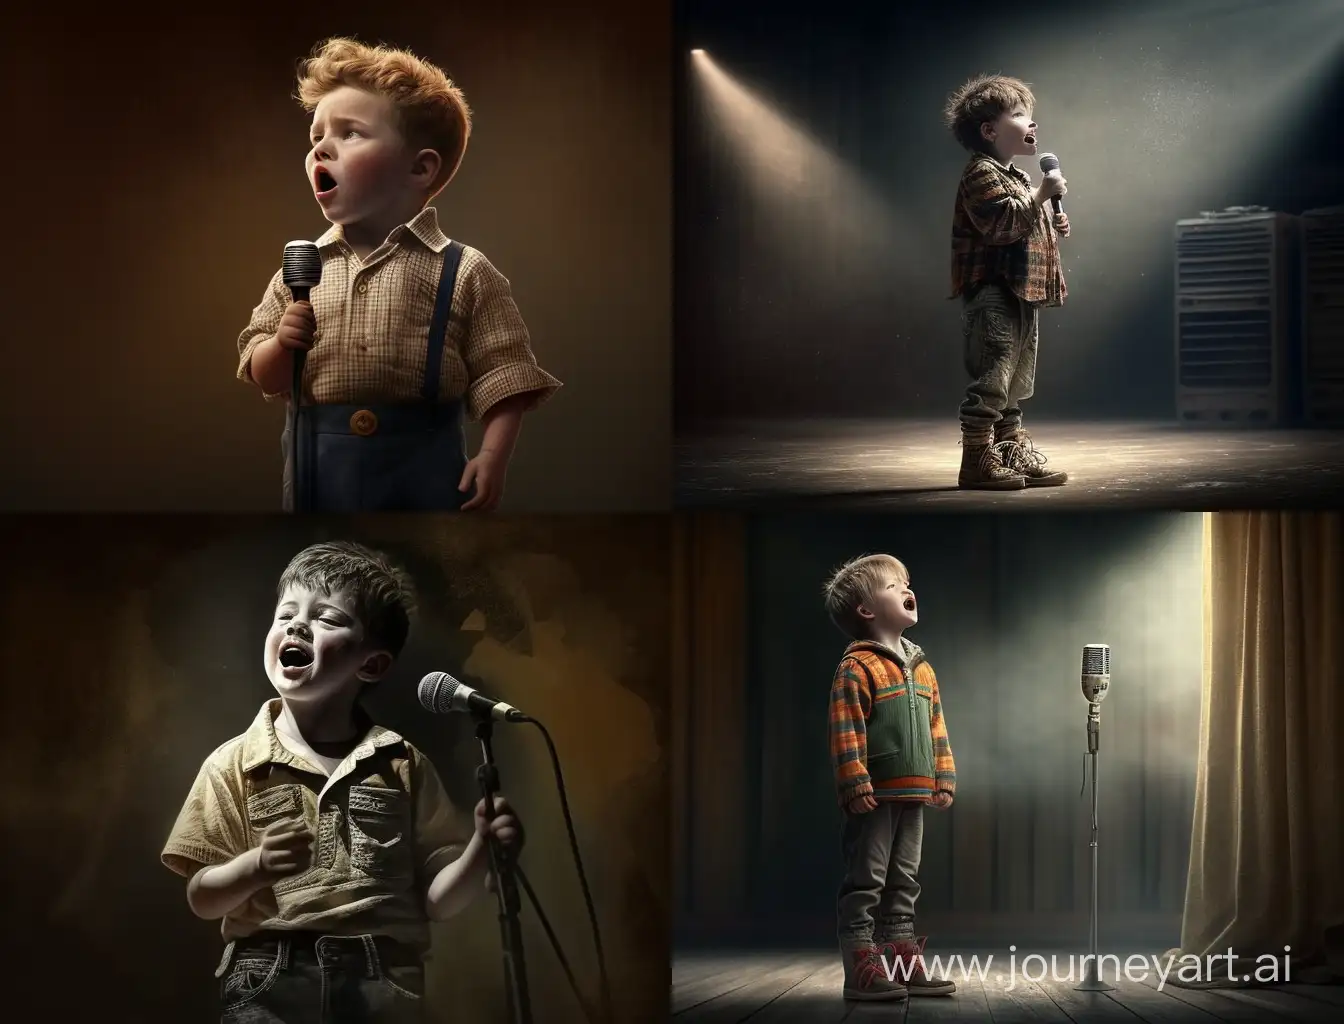 Enchanting-Performance-of-a-Singing-Boy-on-Stage